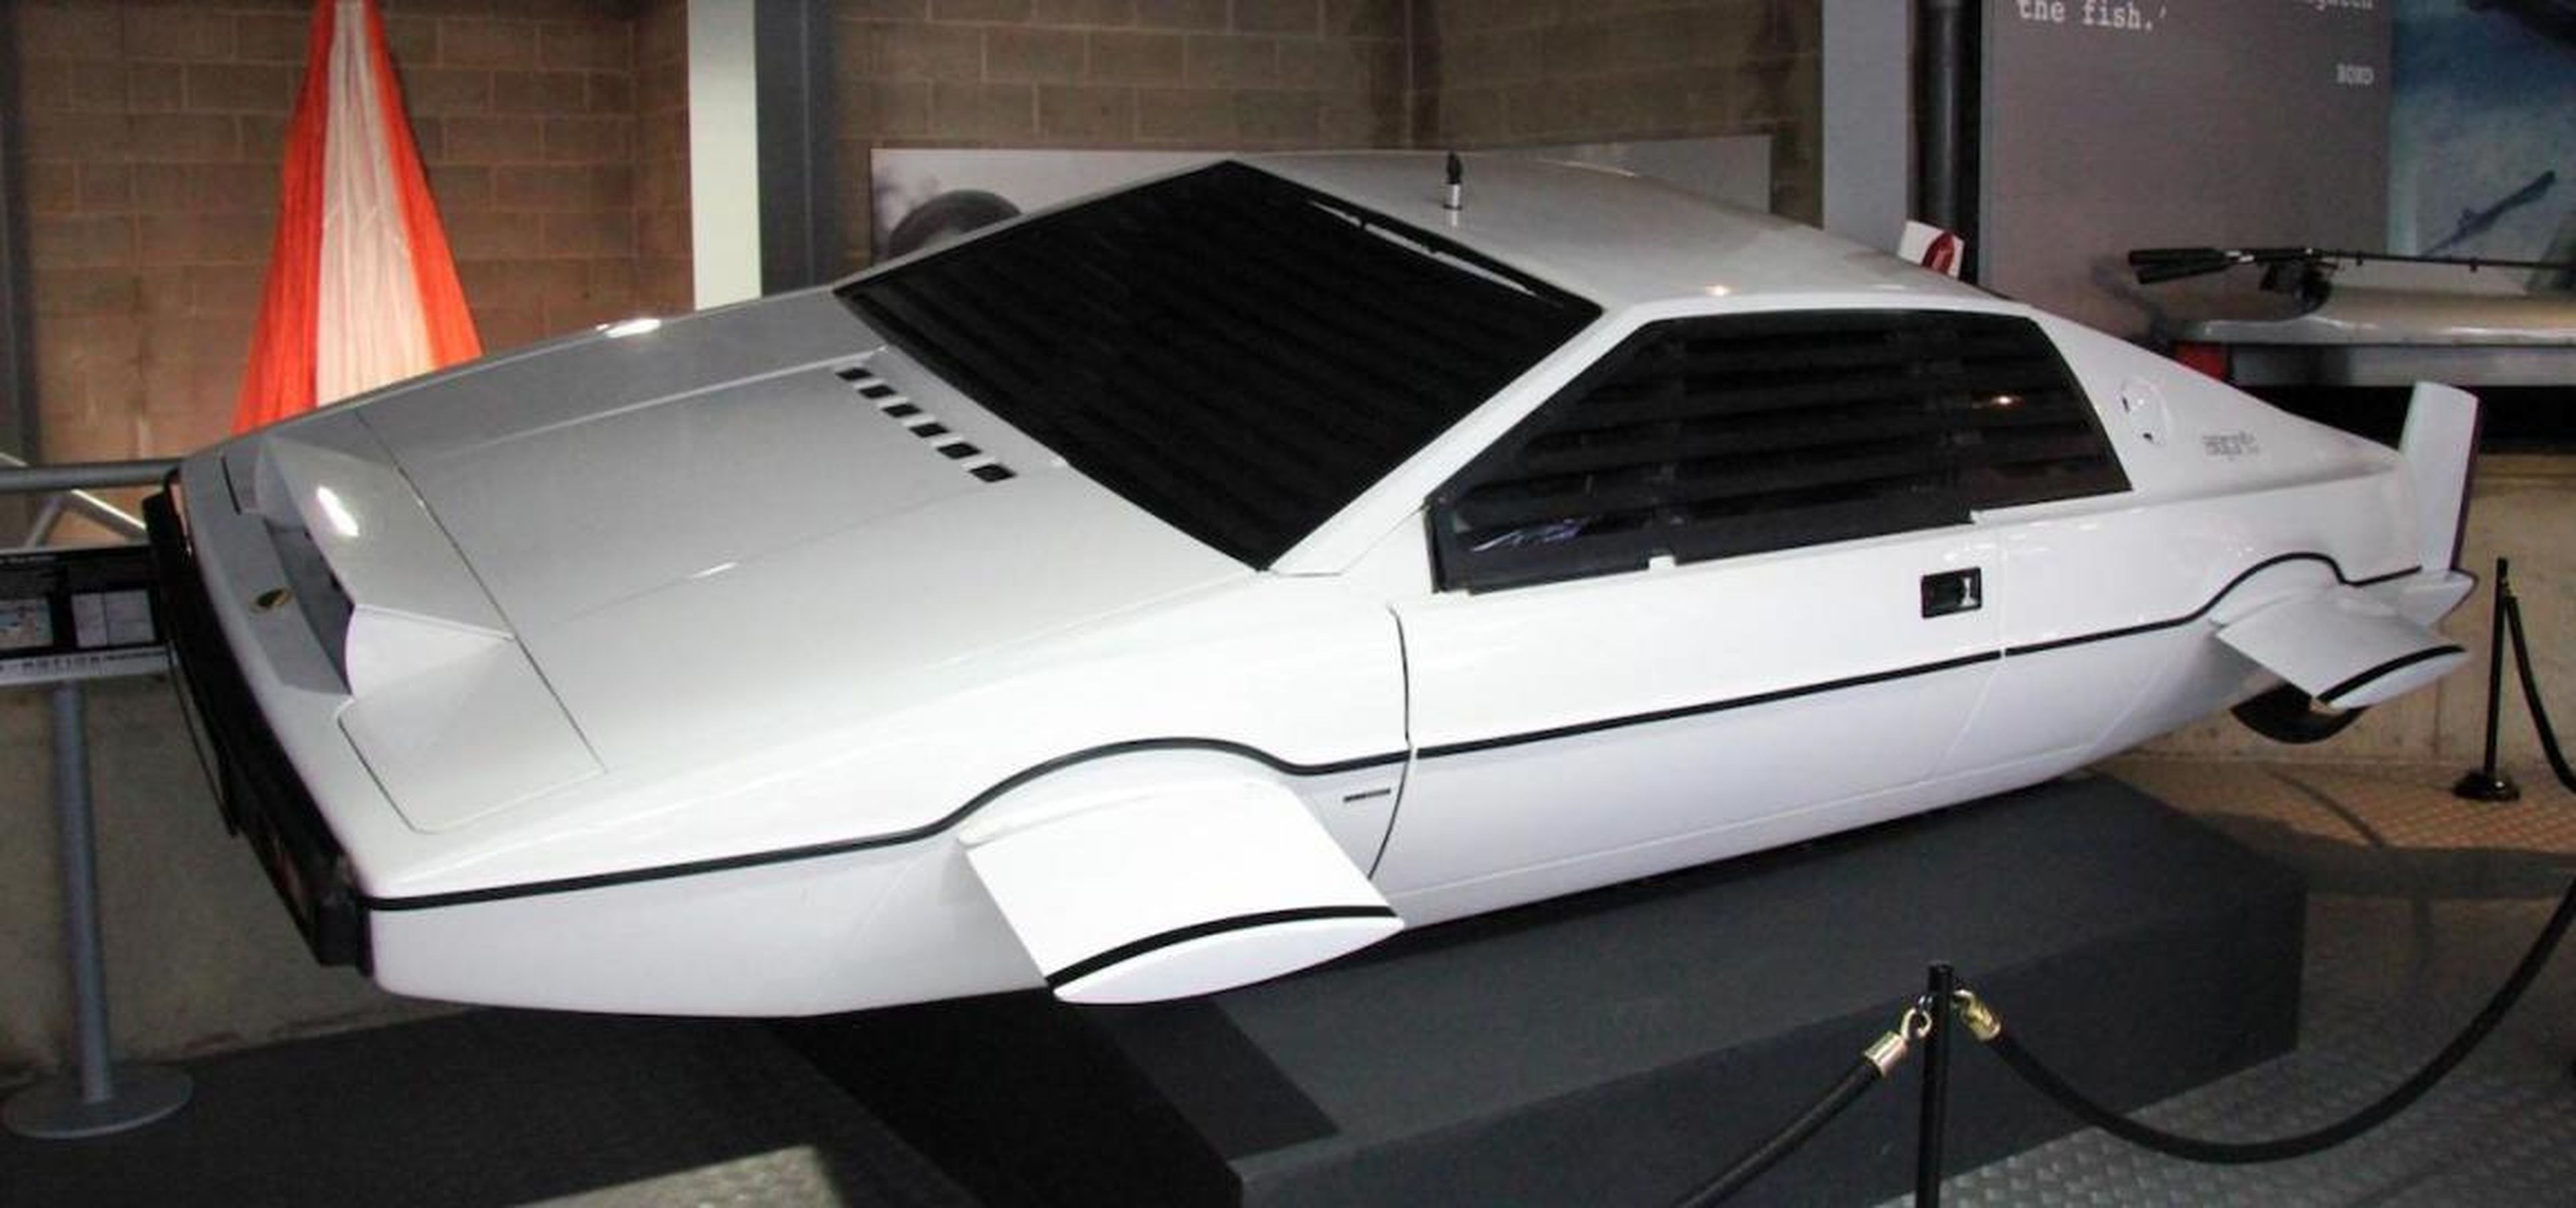 The Lotus Esprit or 'Wet Nellie' on display at the National Motor Museum.